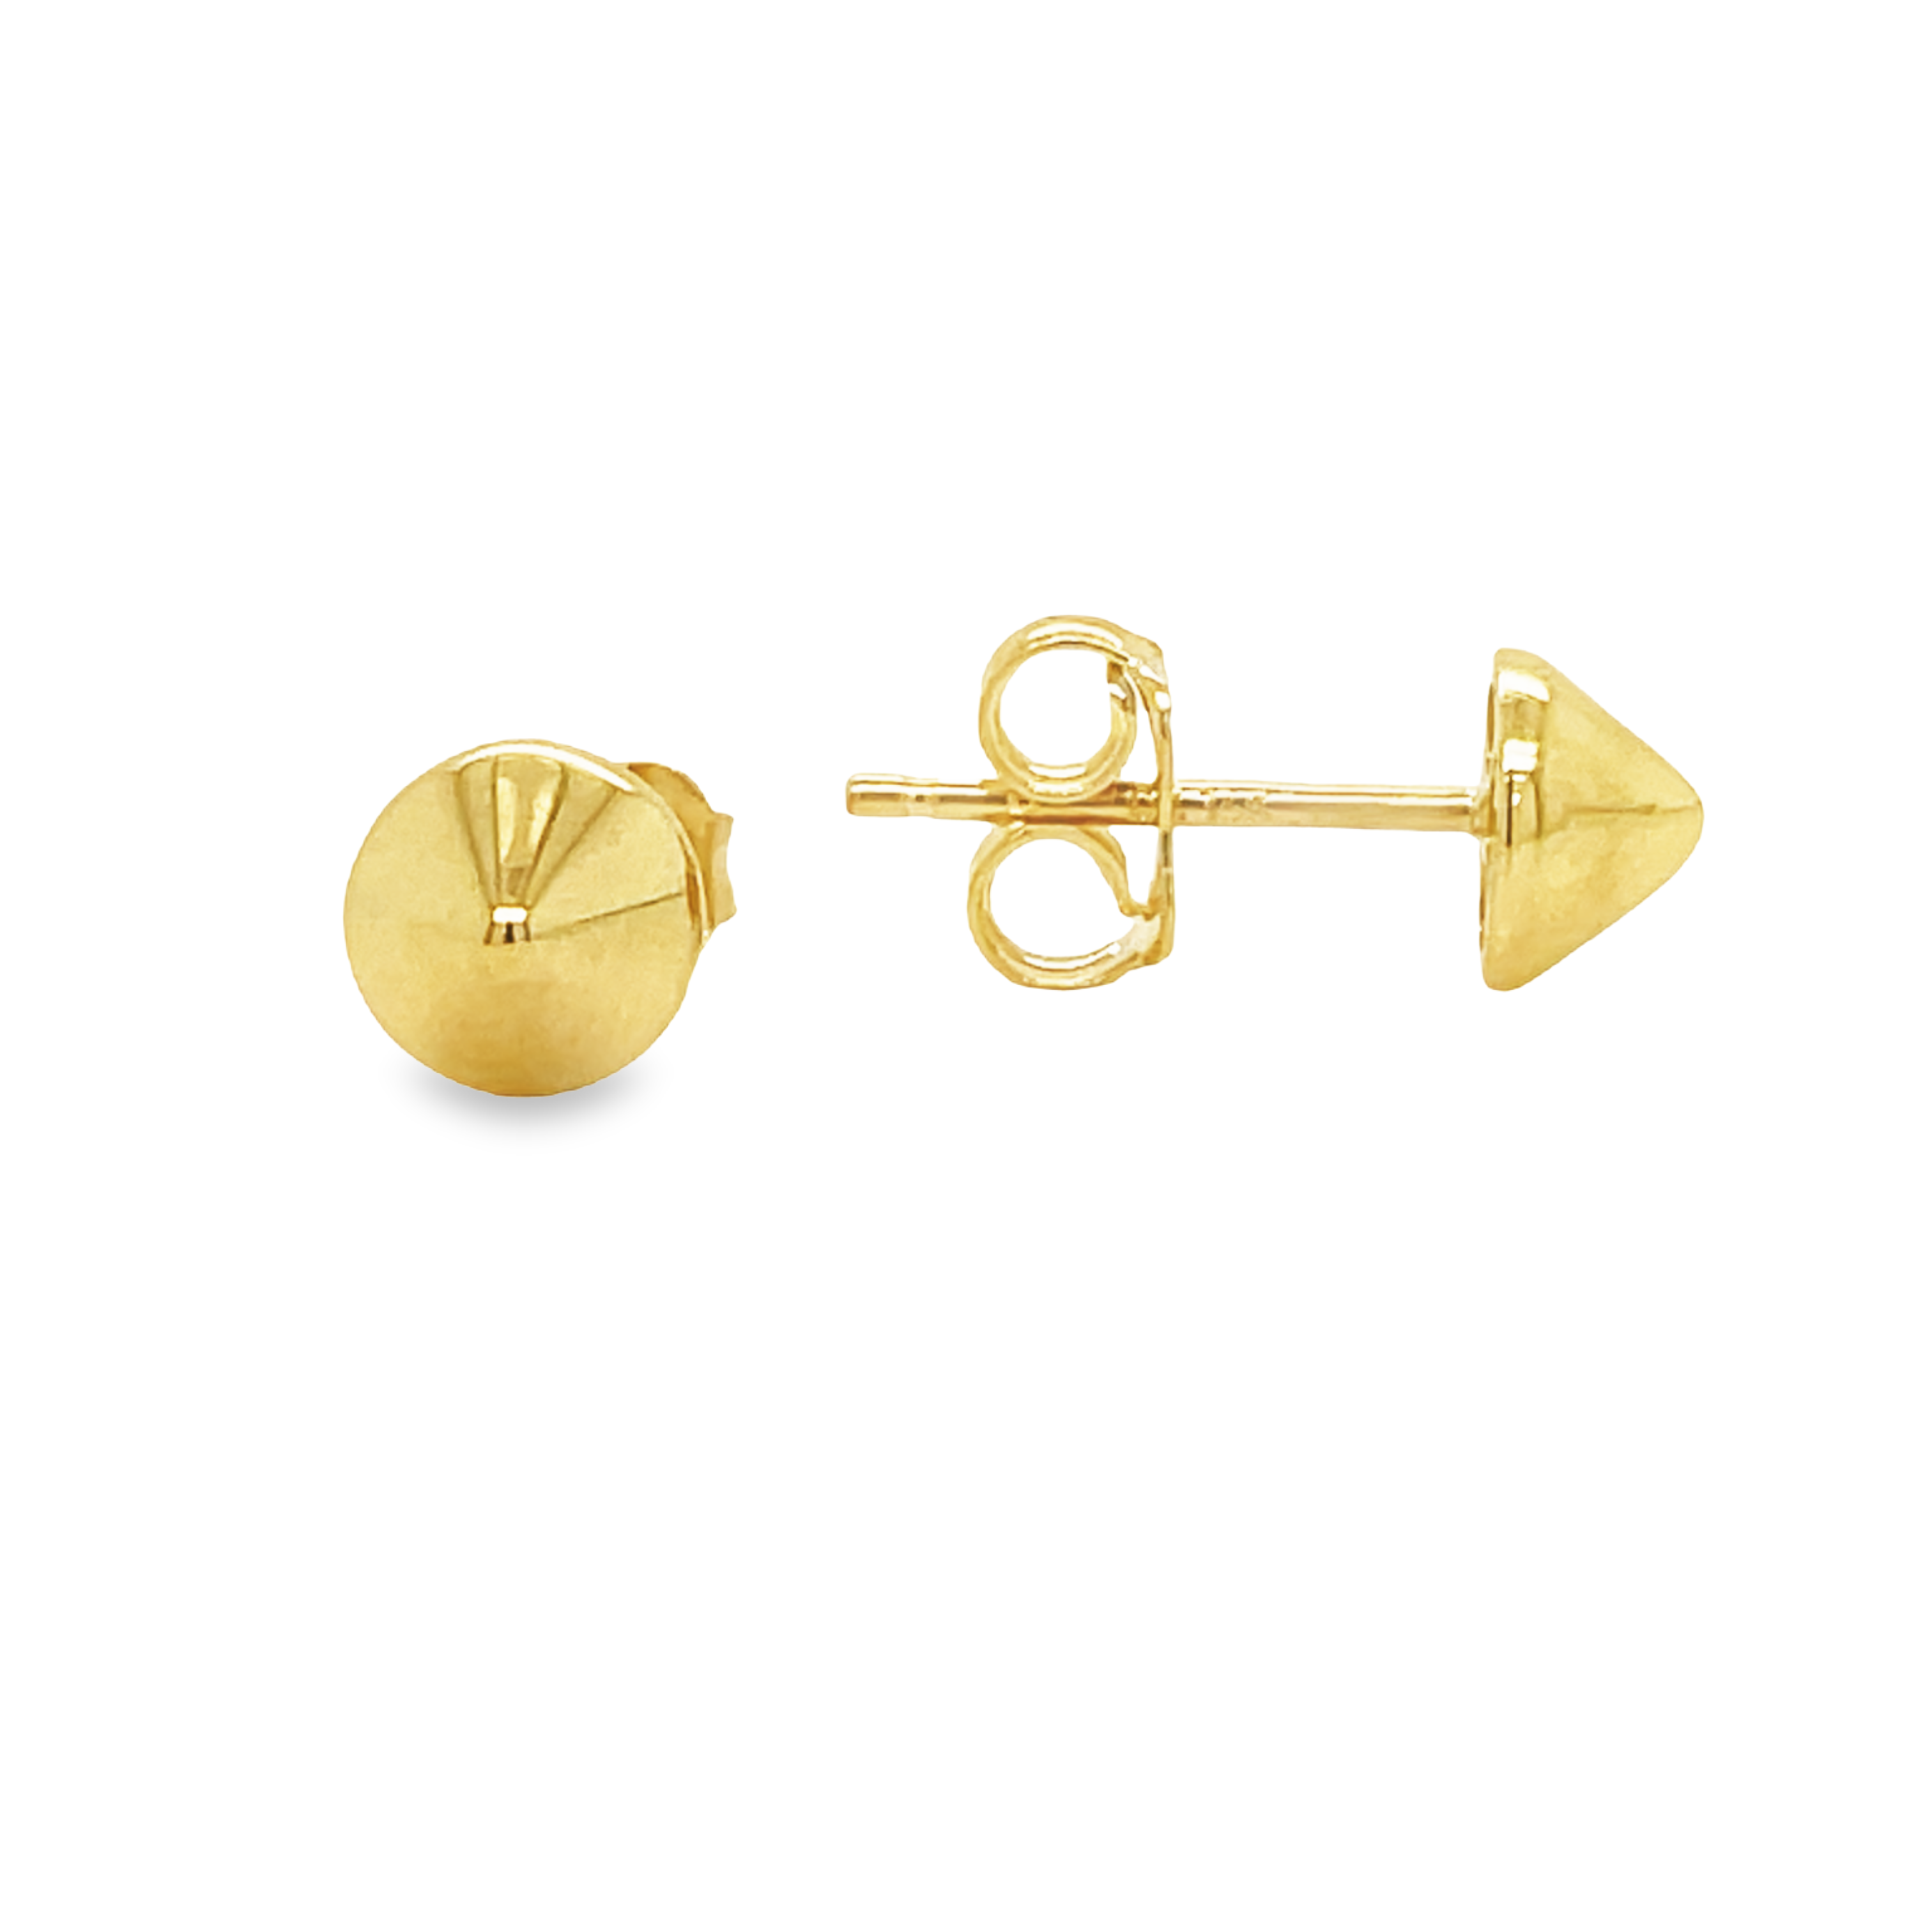 These stunning Italian-made earrings feature a classic point pair crafted from 14k yellow gold. The locket and key measure 6.00 m with friction backs for secure wear. A perfect addition to any jewelry collection.      